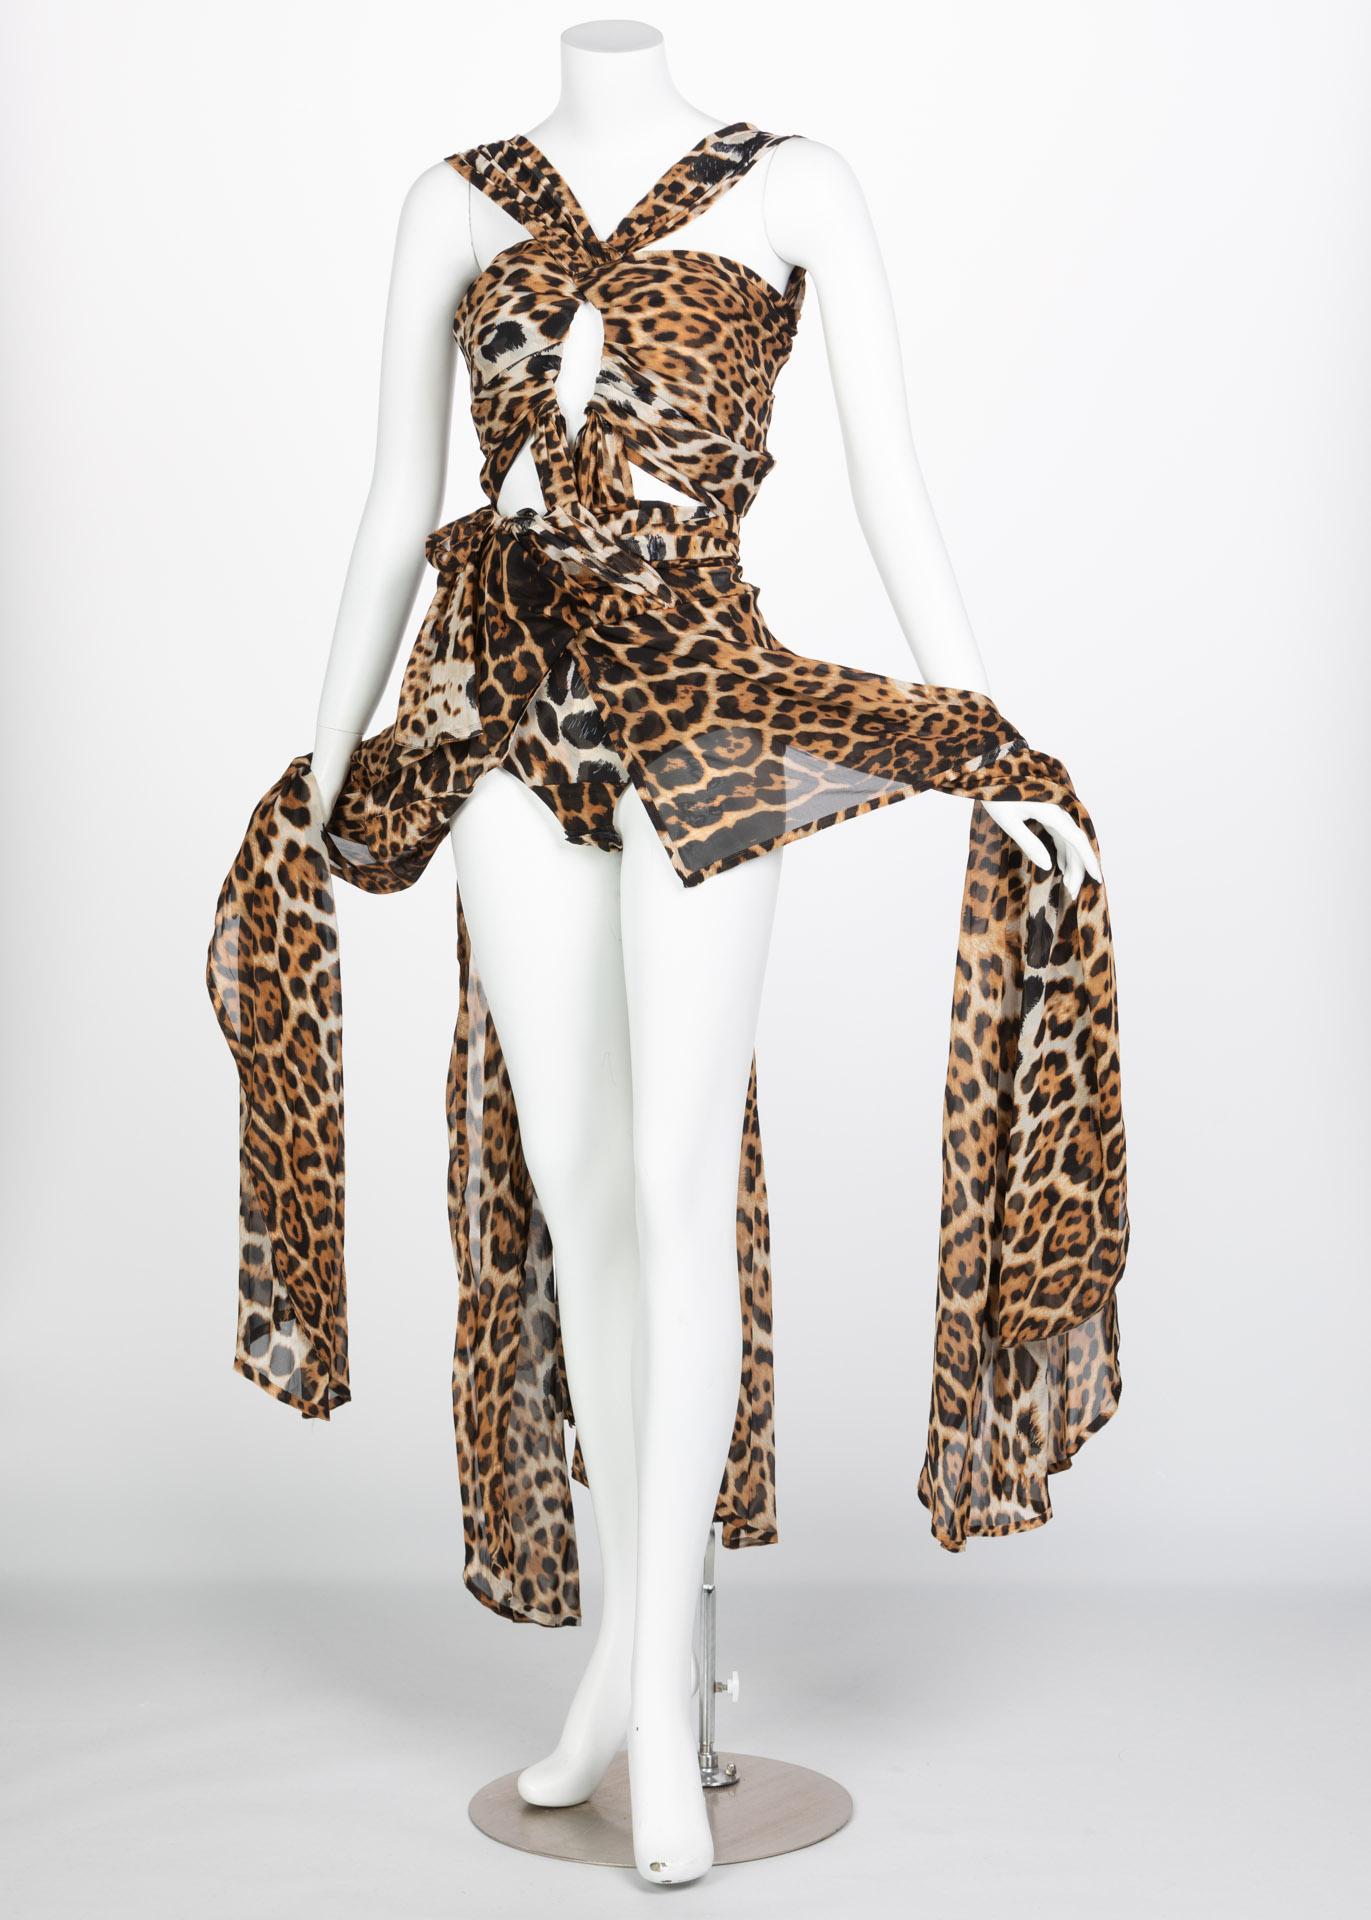  Yves Saint Laurent by Tom Ford Silk Leopard Cut Out Maxi Dress YSL, 2002  1